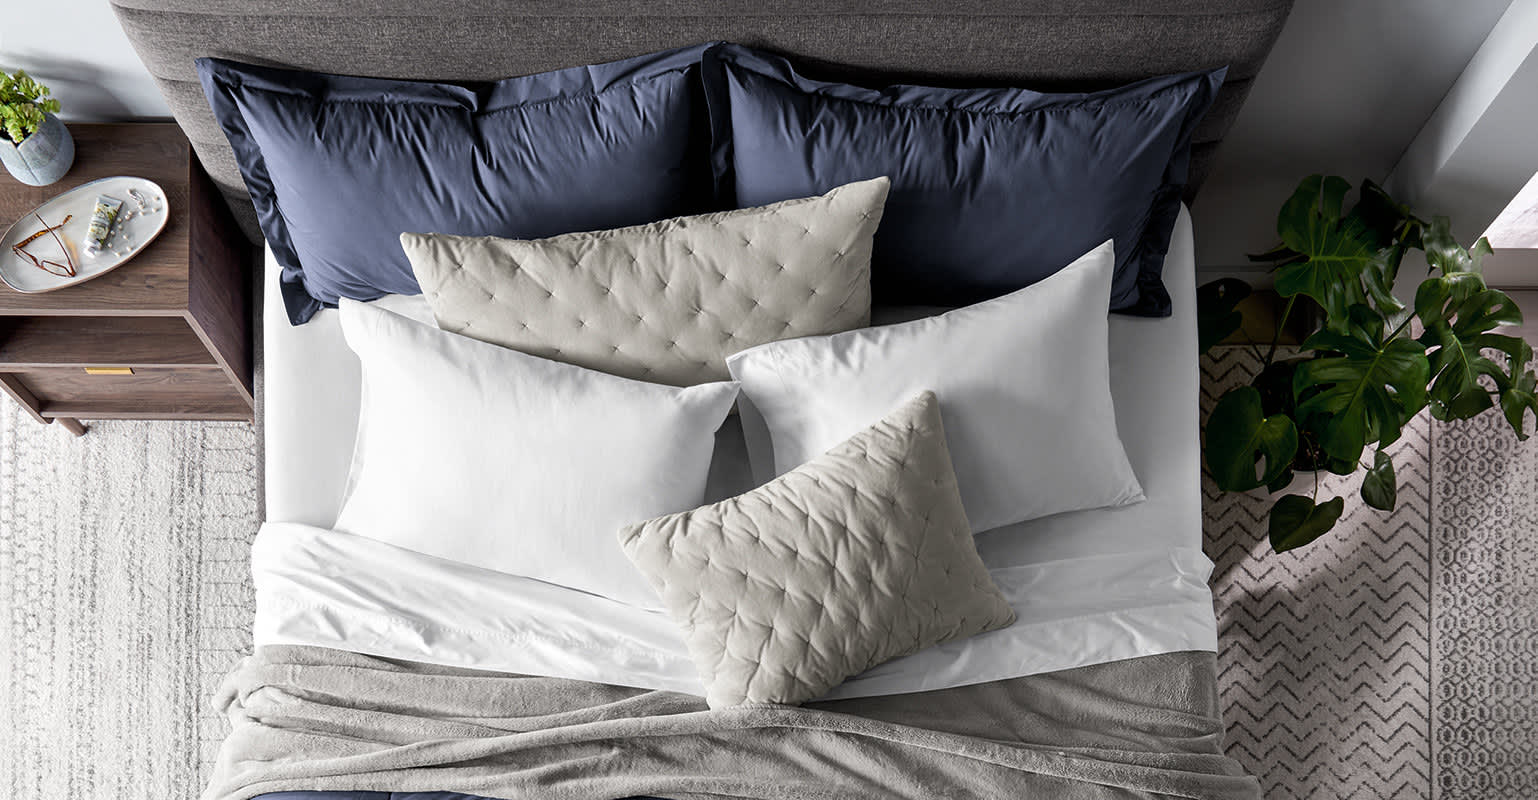 Pillows on dressed bed.